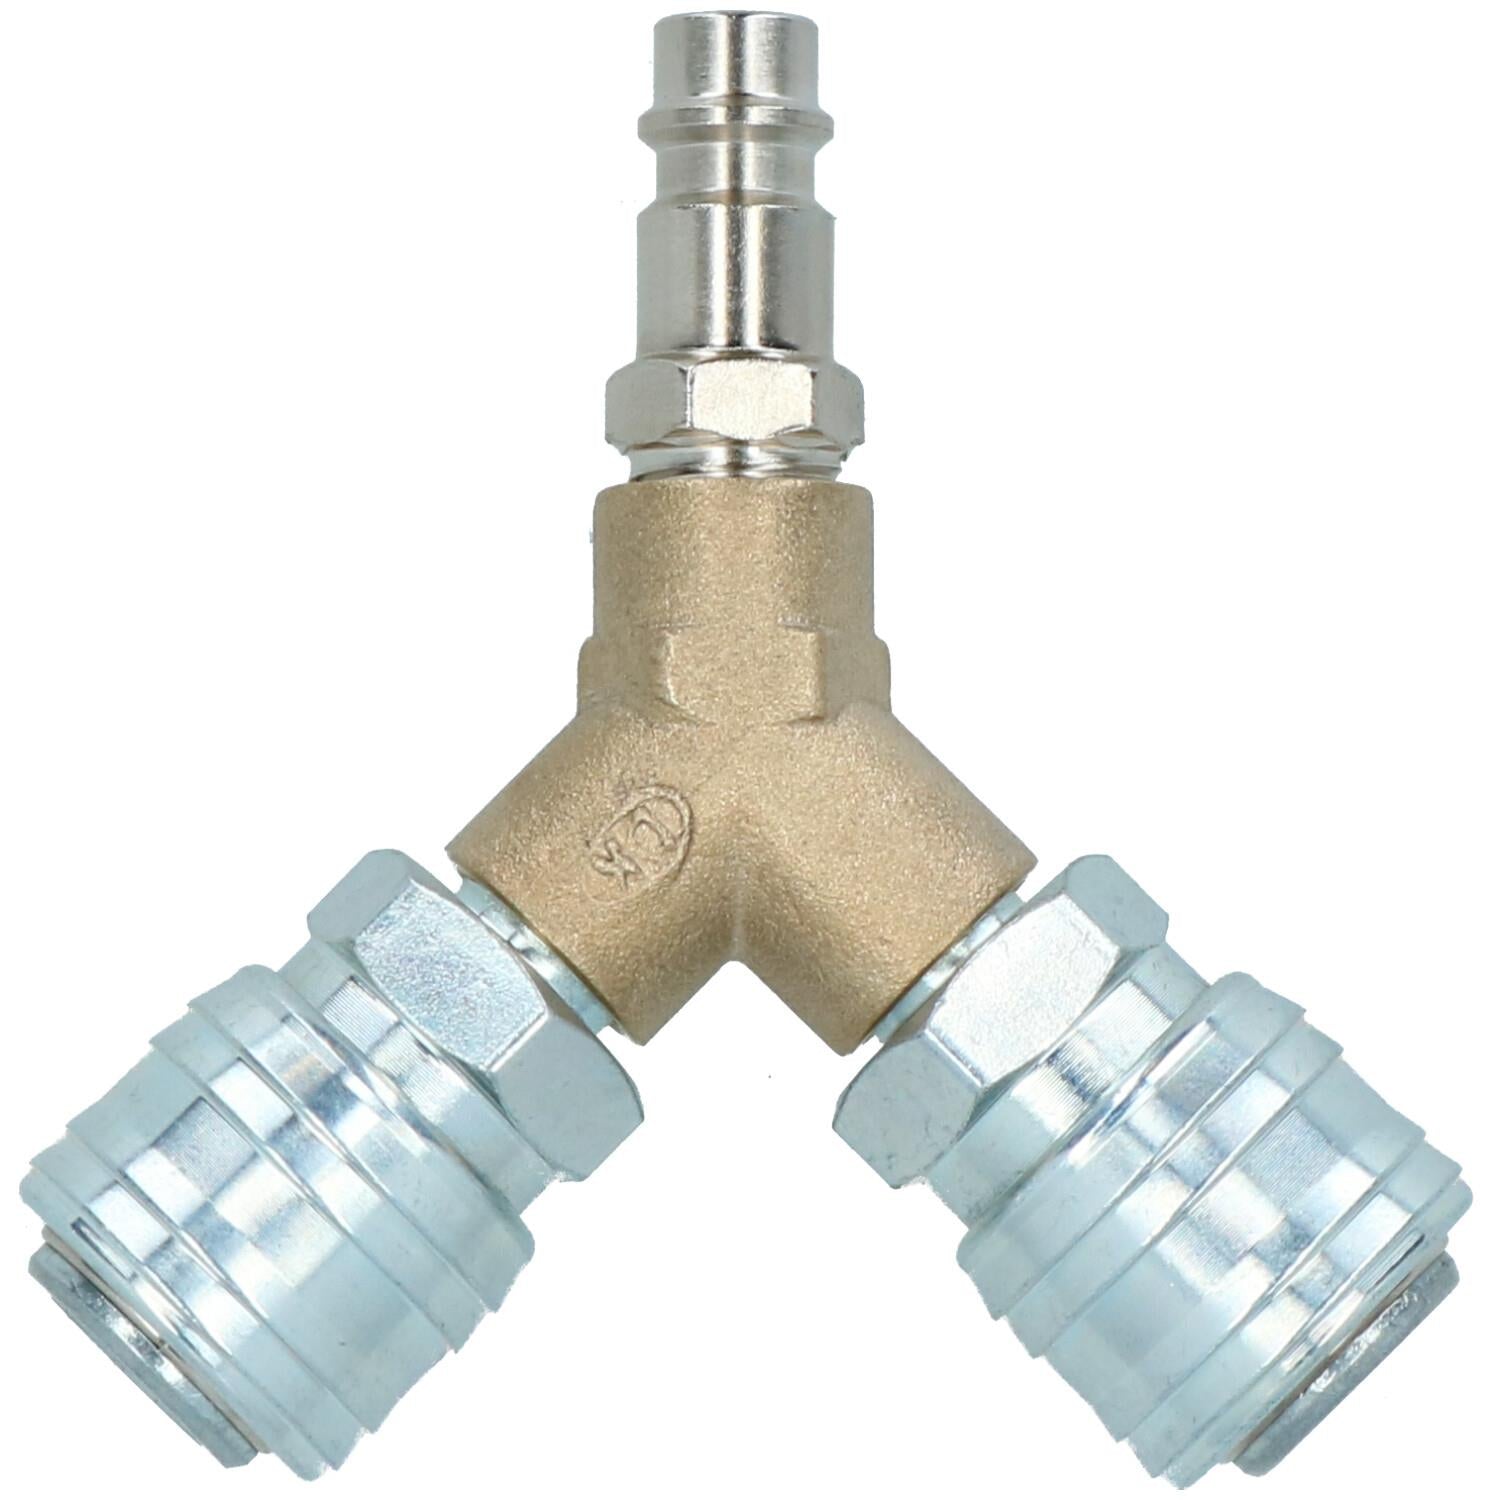 Airline Y Piece 3 Way EURO Quick Release Fittings for Compressor Air Hose